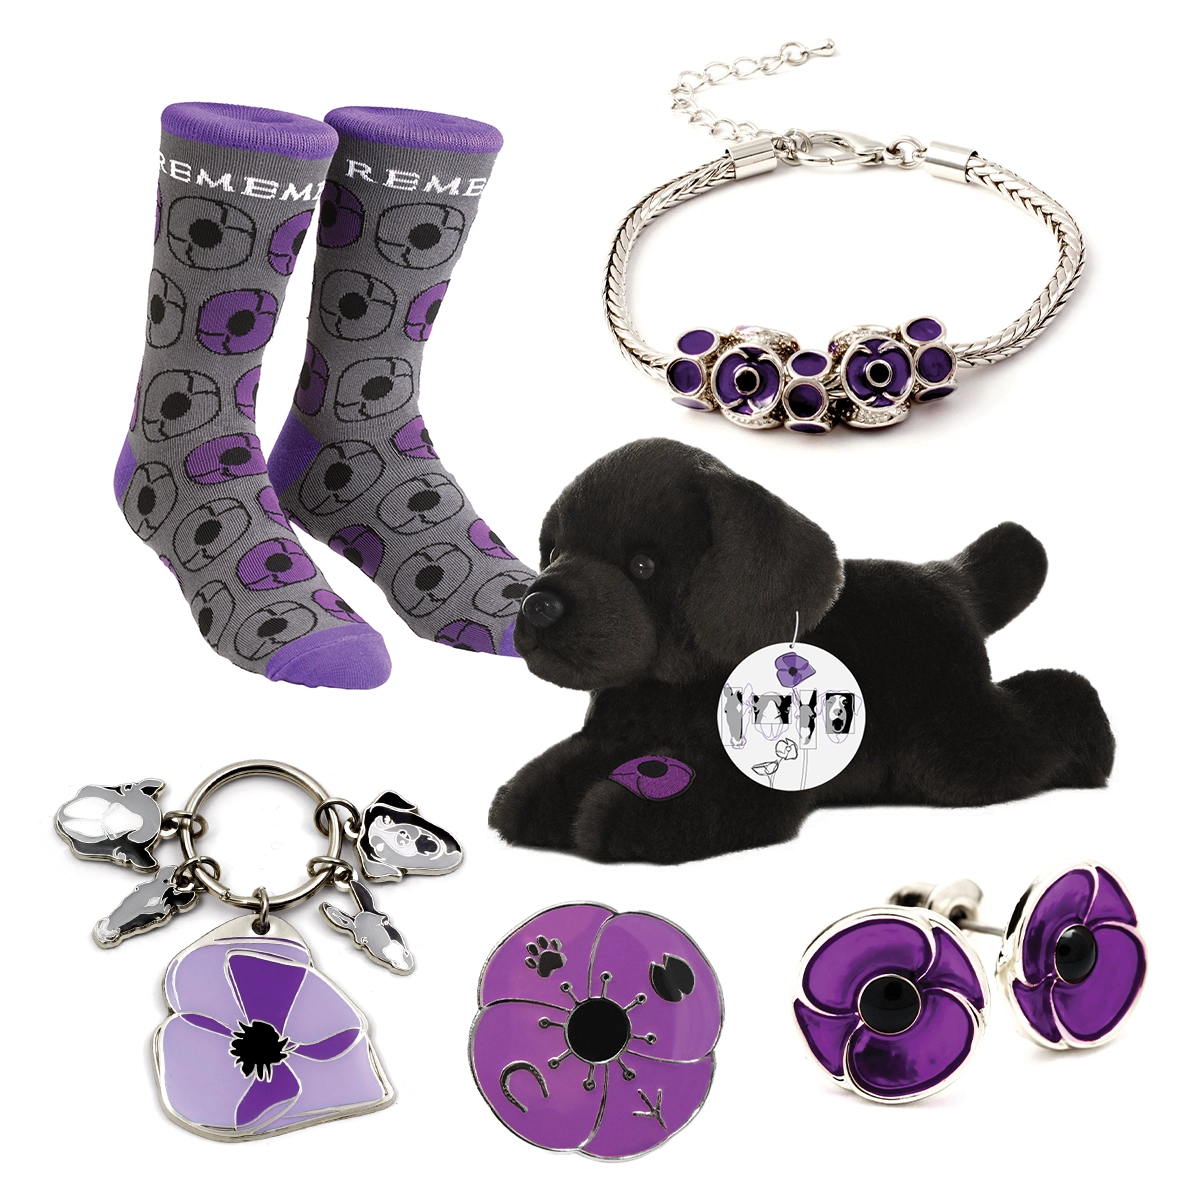 The Purple Poppy Collection featuring products from the purple poppy collection available on Military Shop Remembrance Day webpage